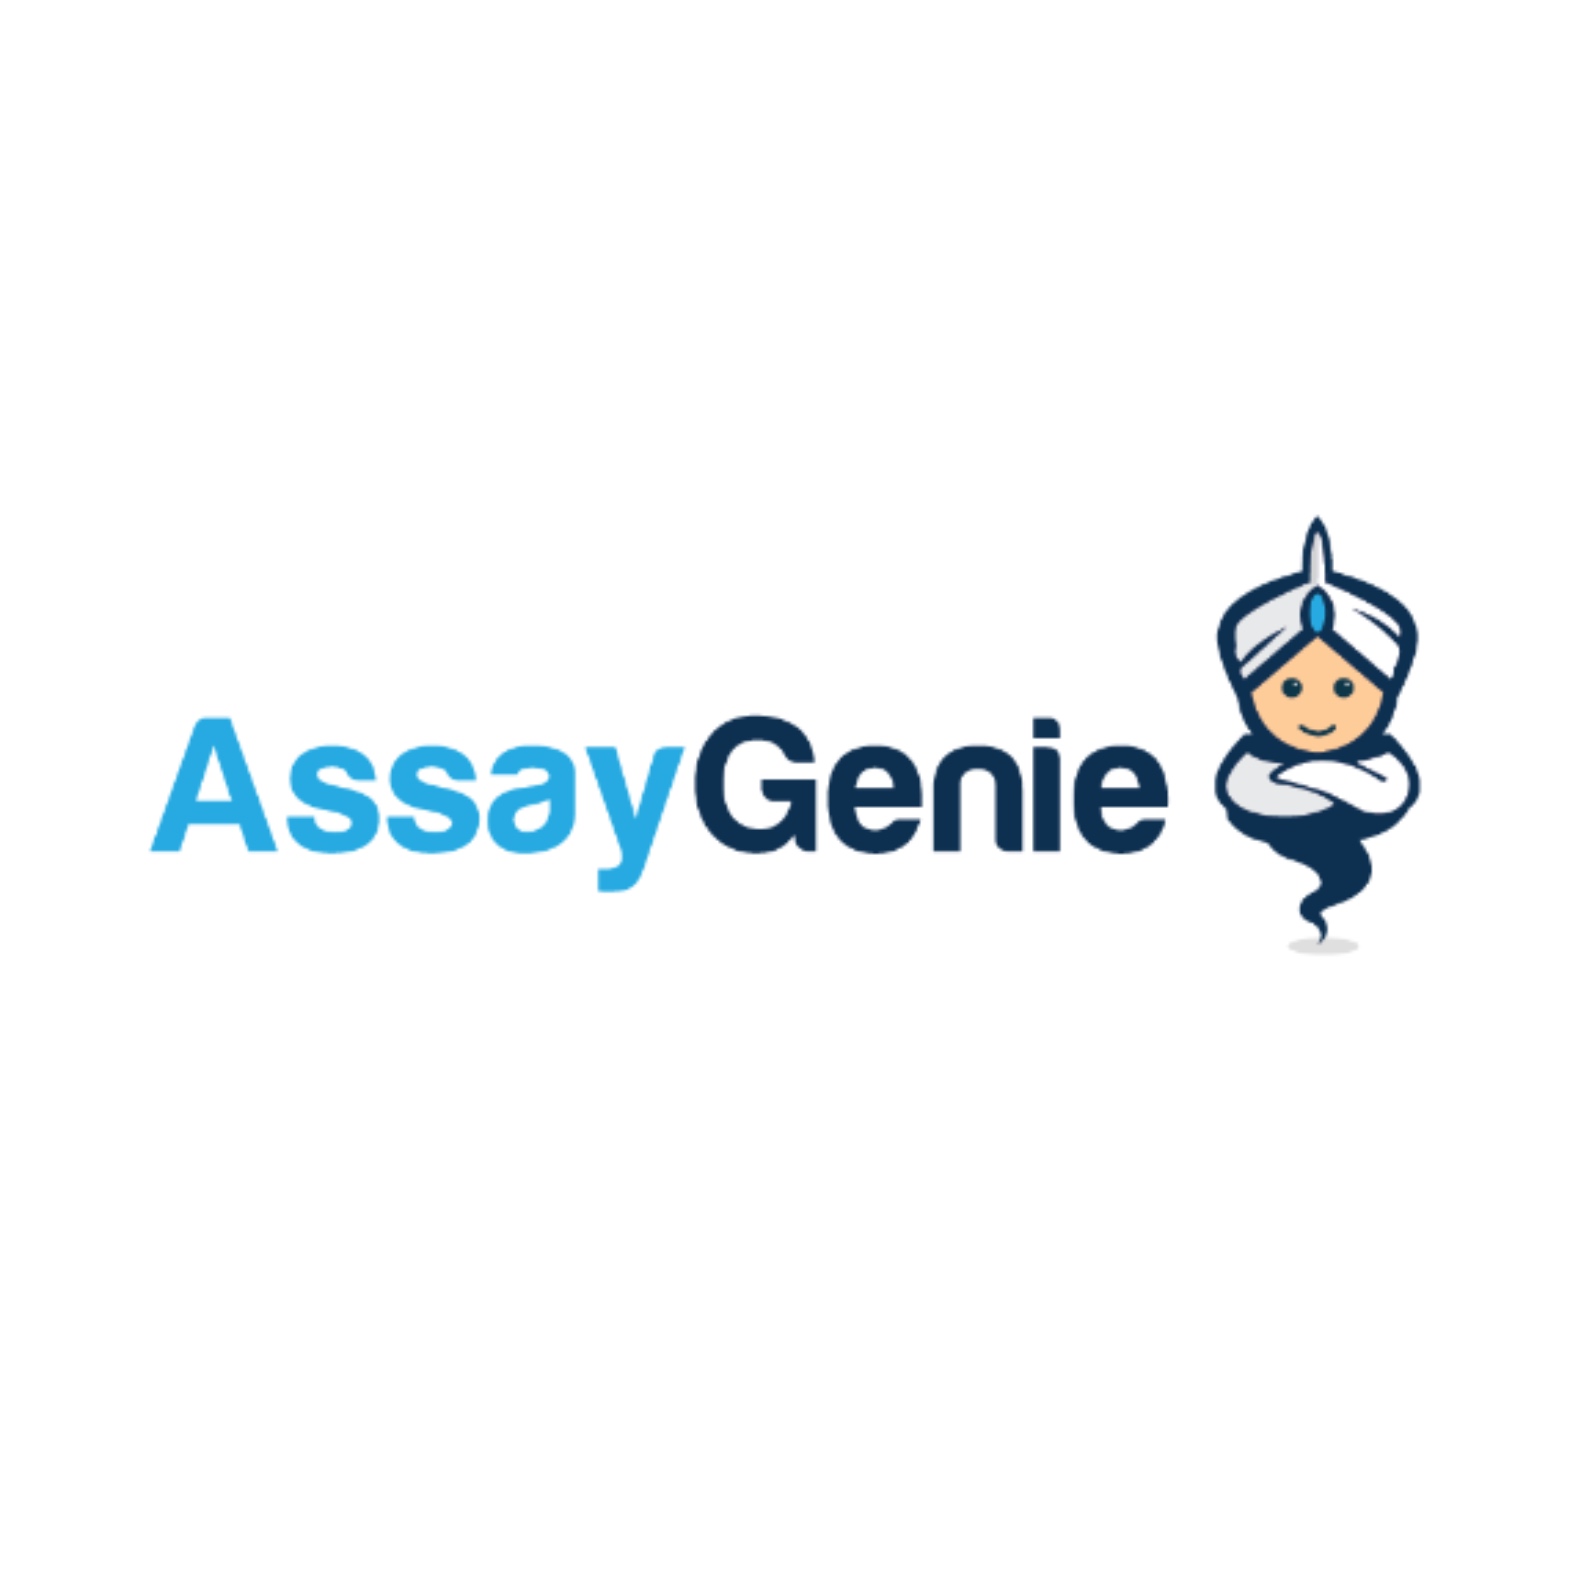 images/AFMS/Partners/Assay%20Genie.jpg#joomlaImage://local-images/AFMS/Partners/Assay Genie.jpg?width=1570&height=1570